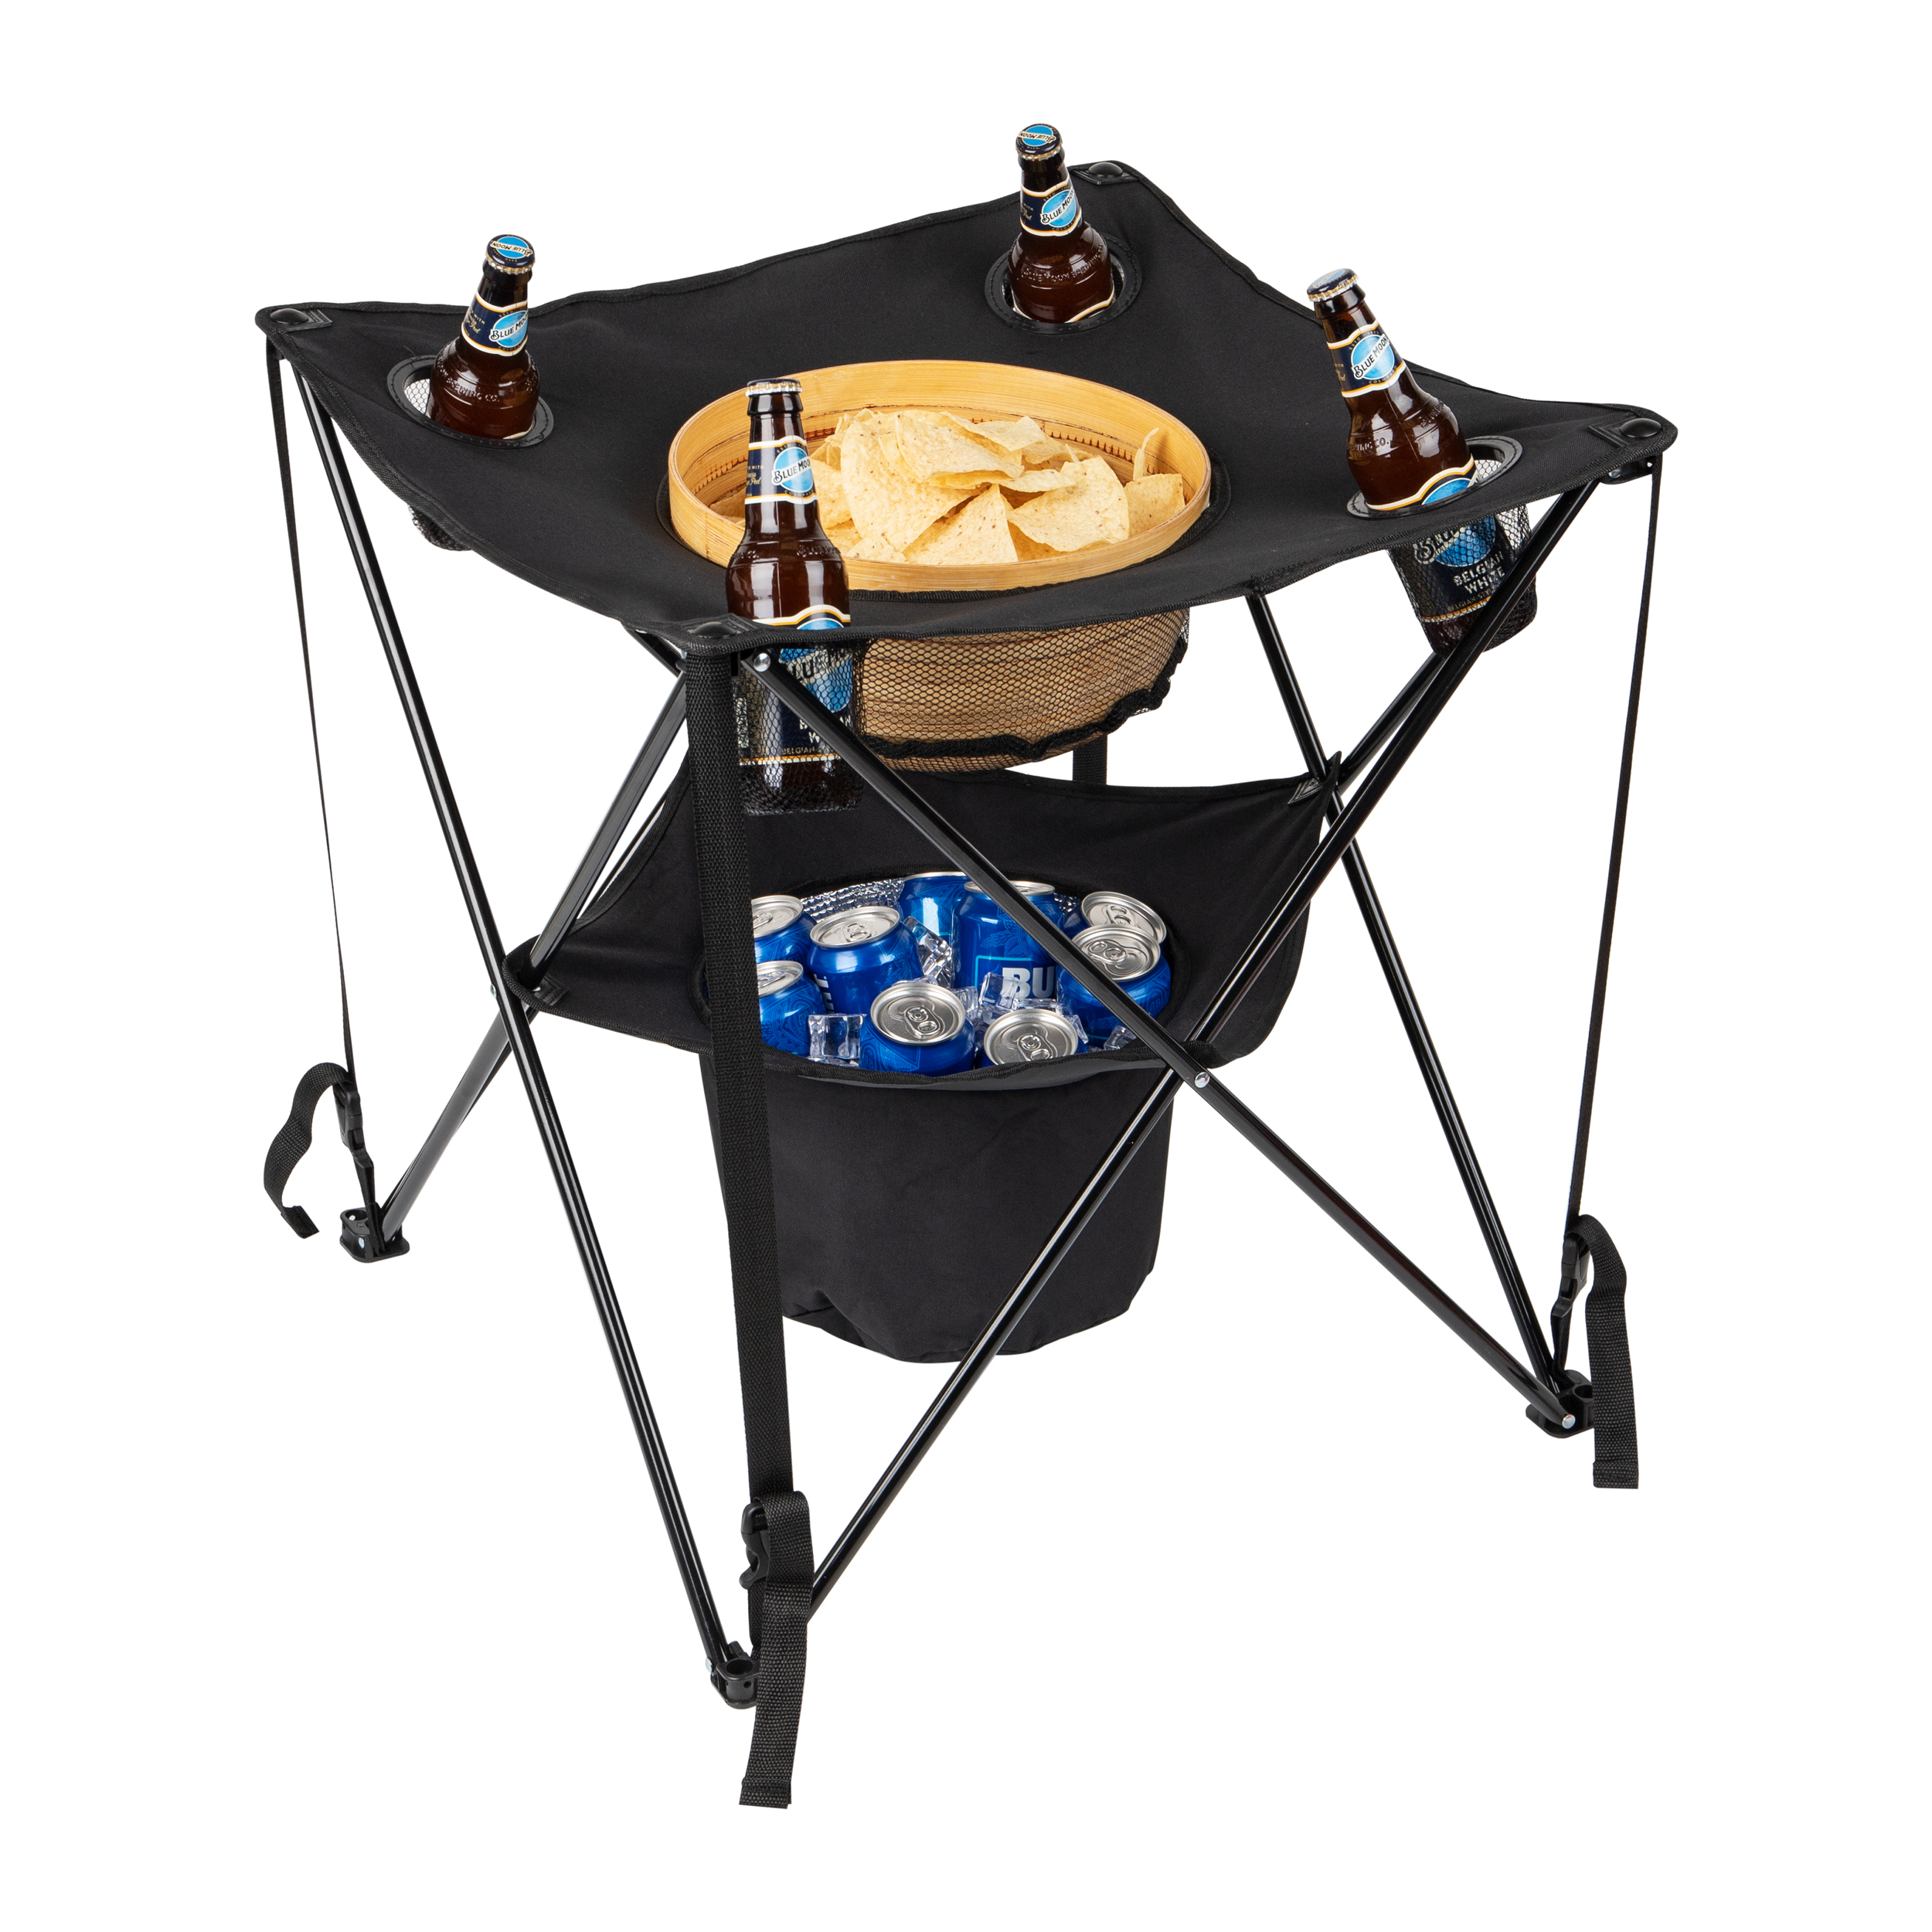 Mind Reader Tailgating Table Collapsible Folding Camping Table with Insulated Cooler, Food Basket, and Travel Bag for Barbeque, Picnic, Camping, and Tailgate - image 3 of 6